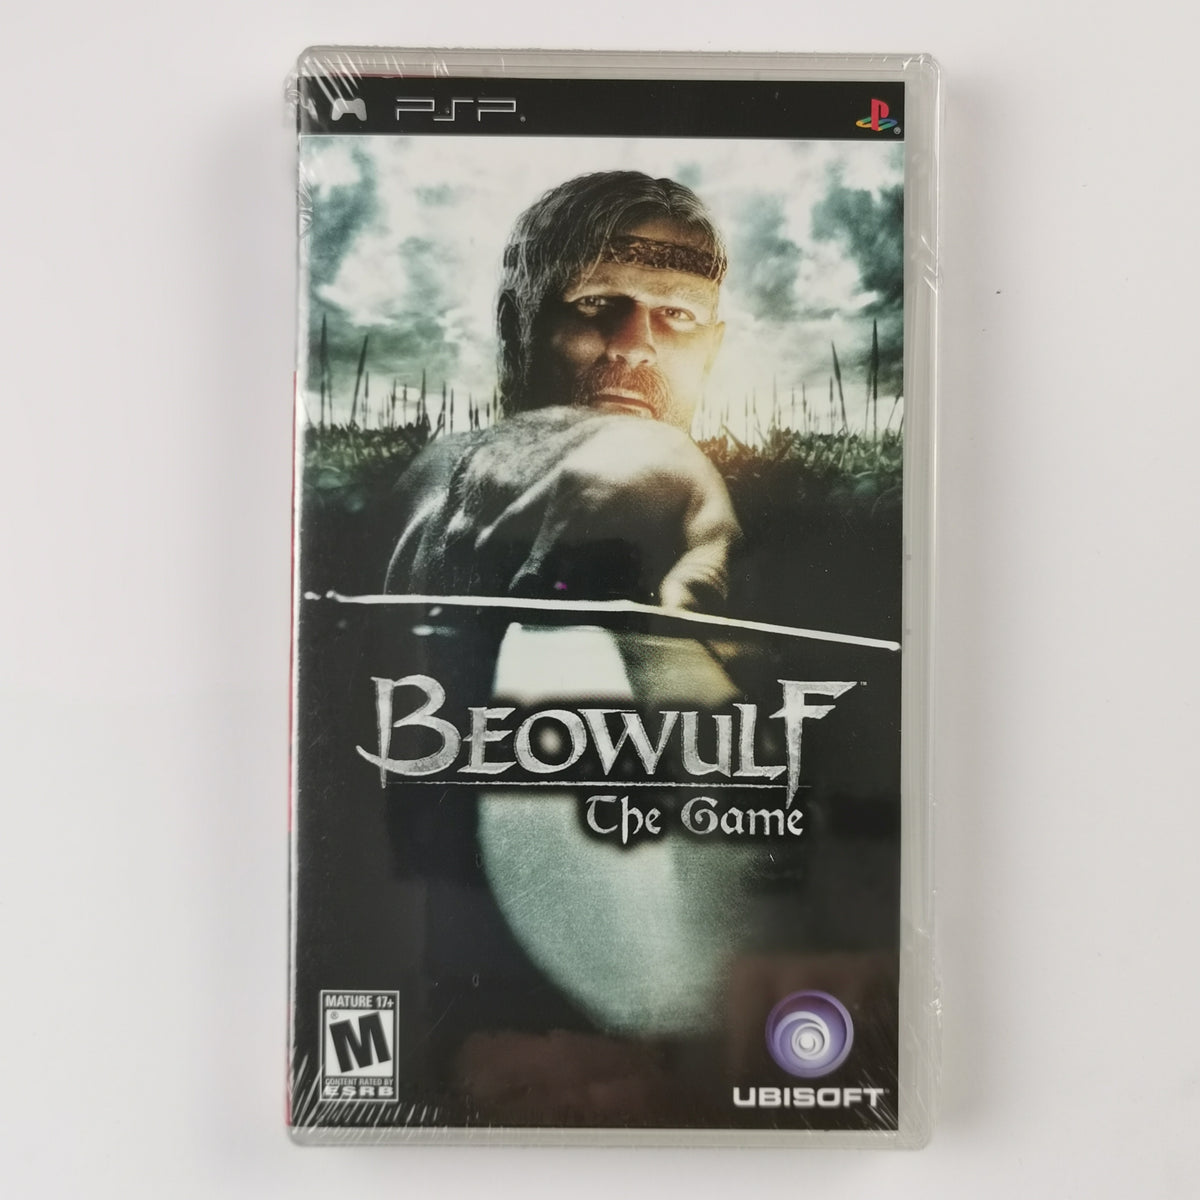 Beowulf the Game PSP [PSP]